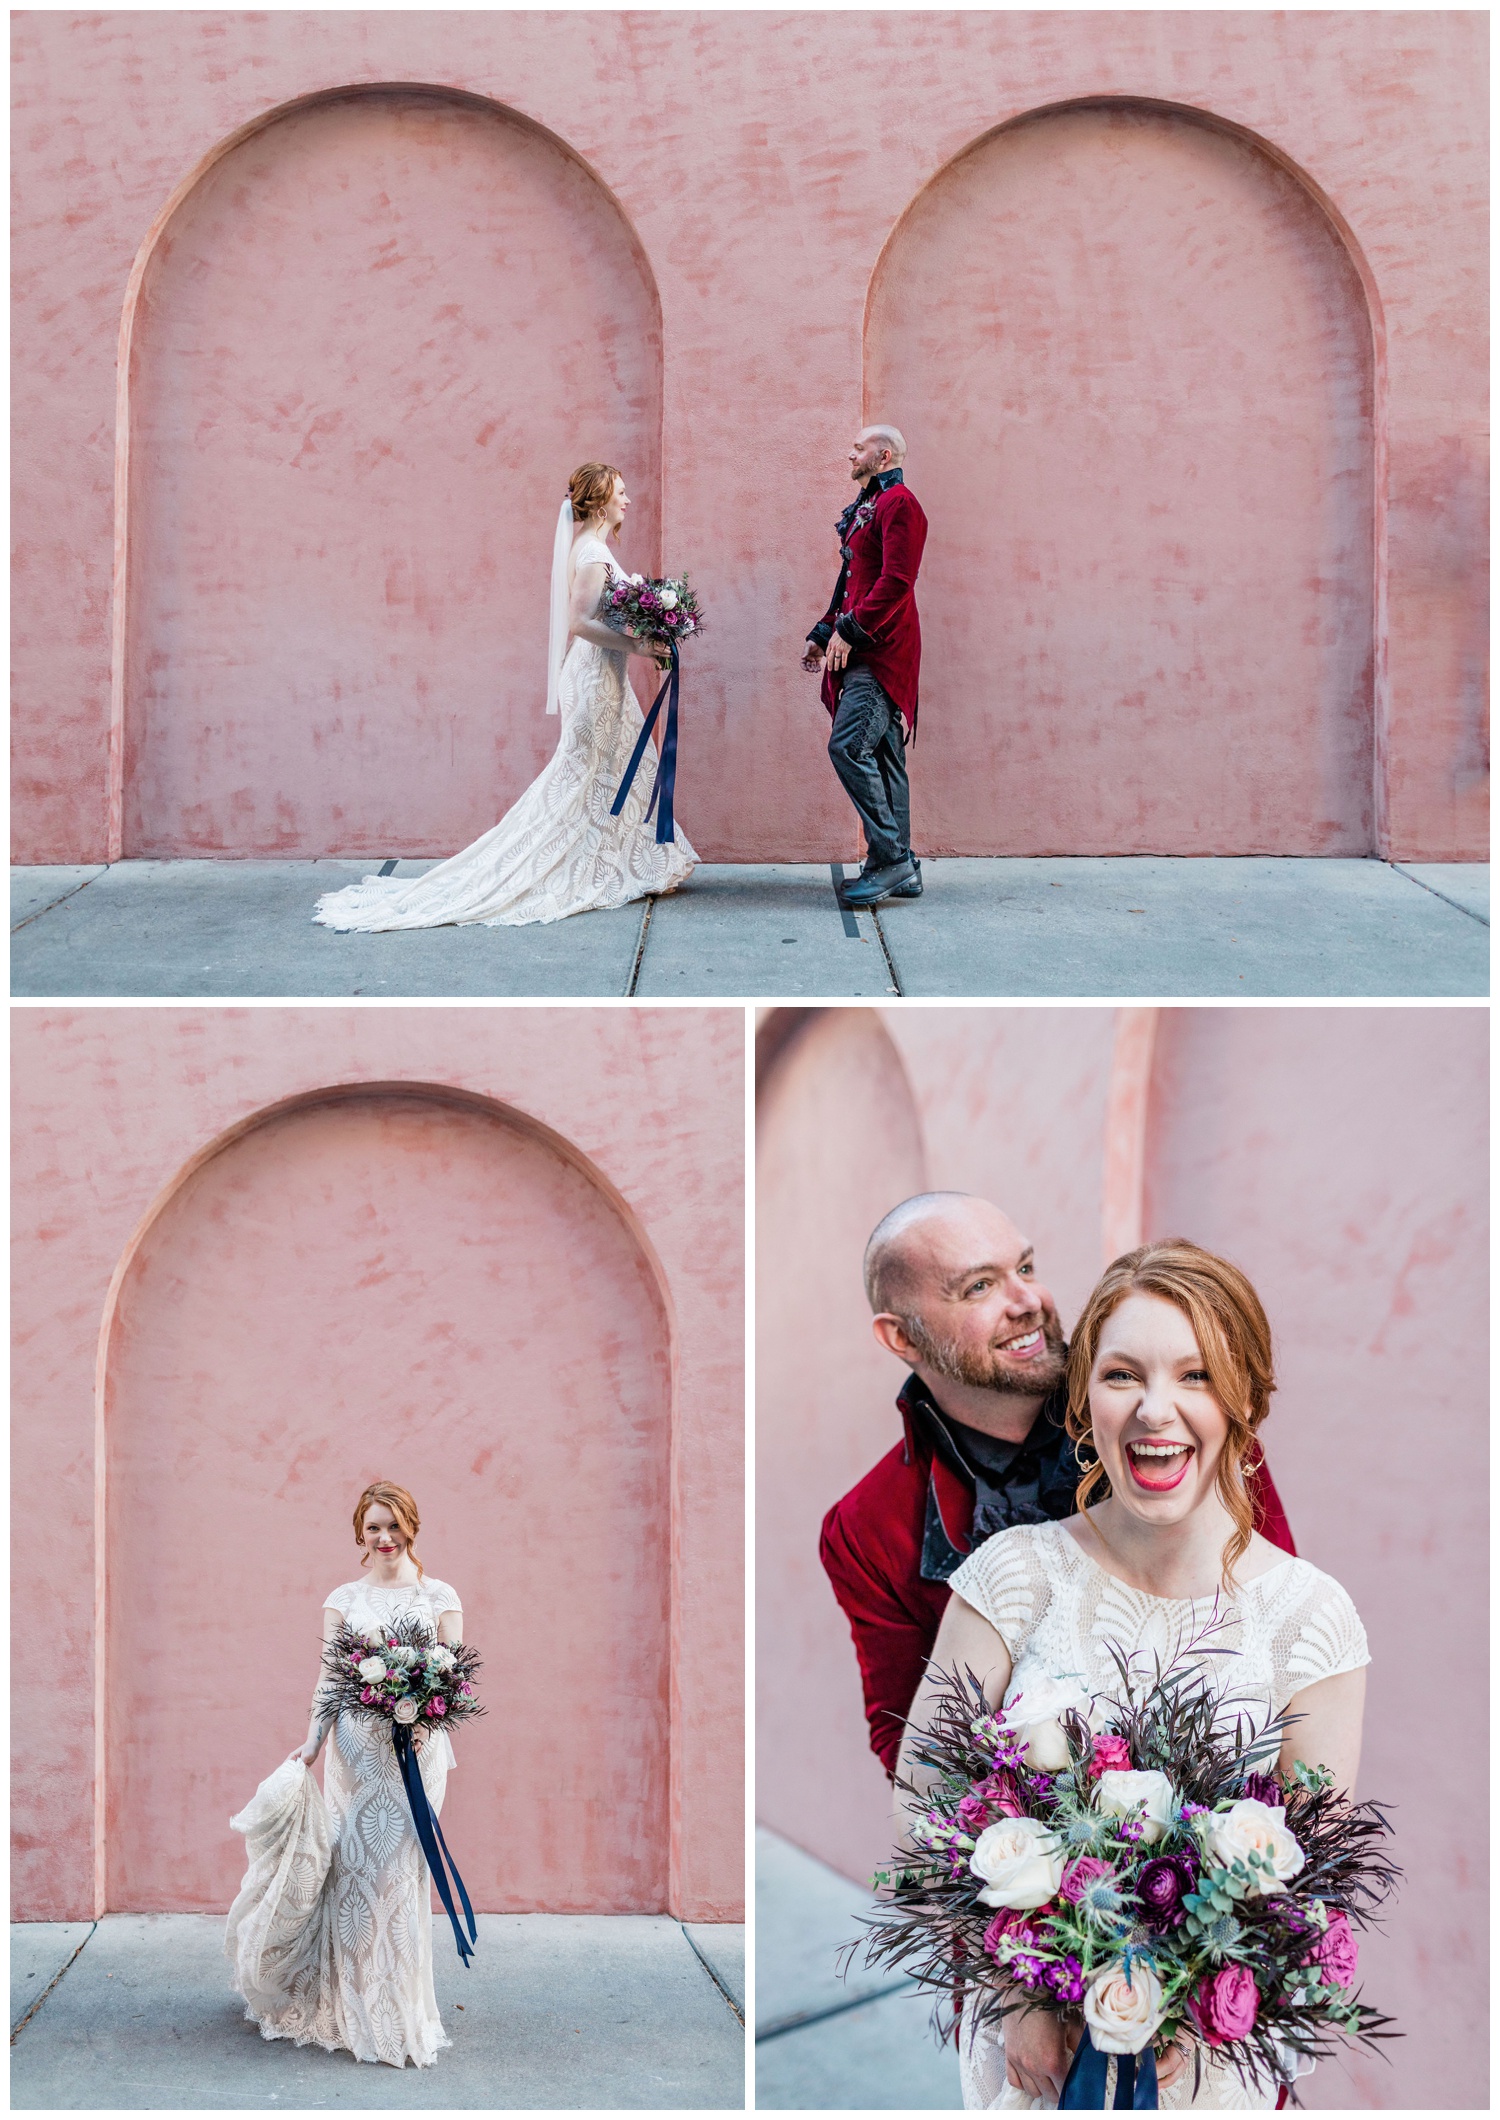 couples photos by the pink wall in savannah with the Savannah Elopement Package